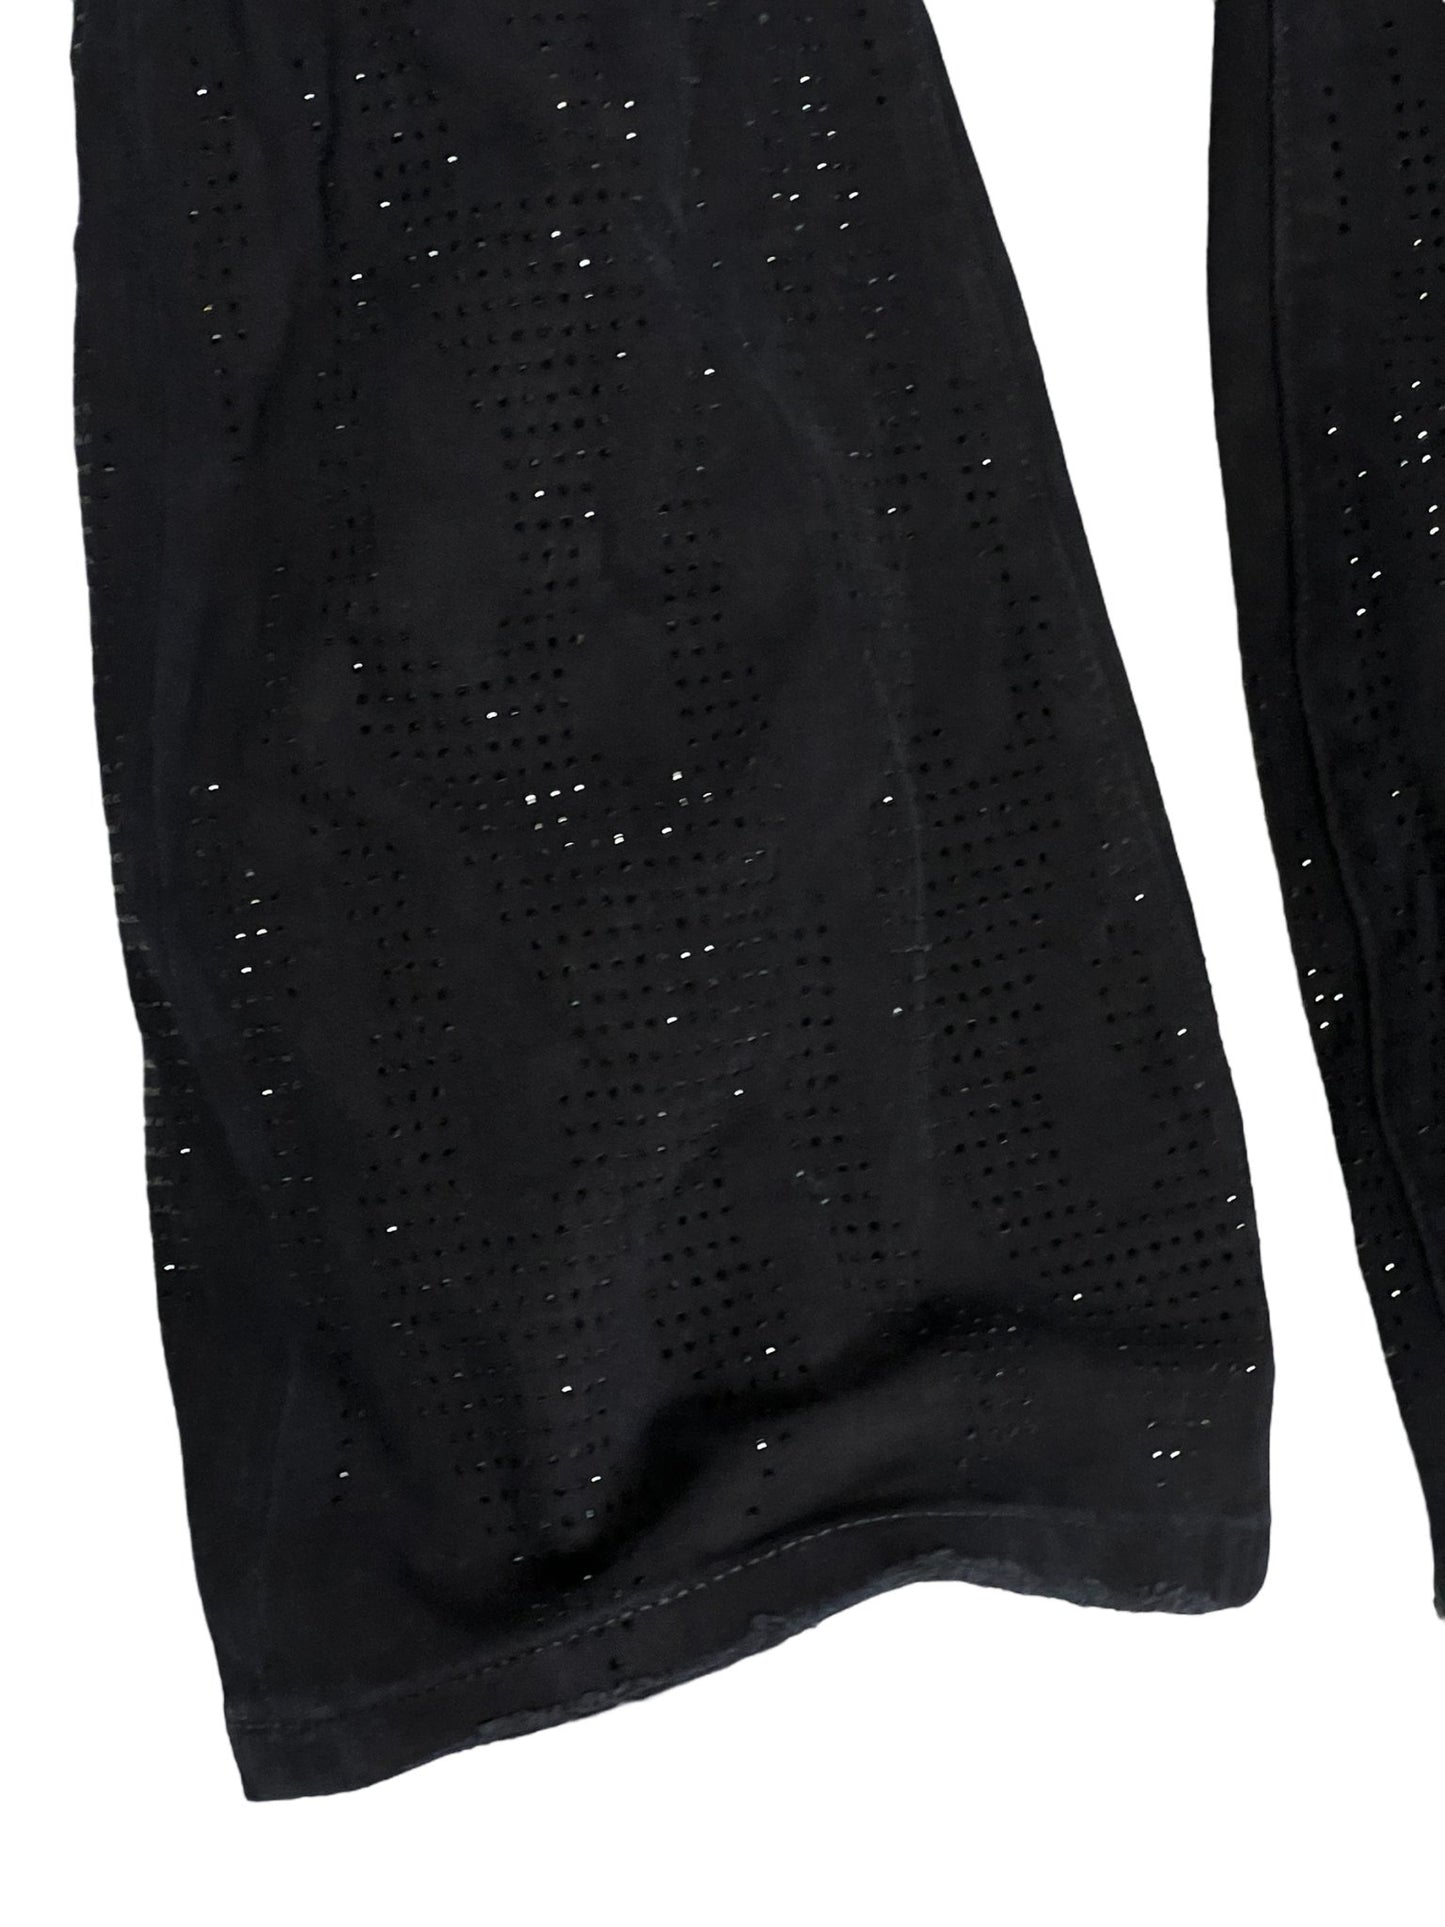 A pair of PURPLE BRAND P004-FFBL FLAMED FLARE BLACK leggings with sparkly flame graphic details.